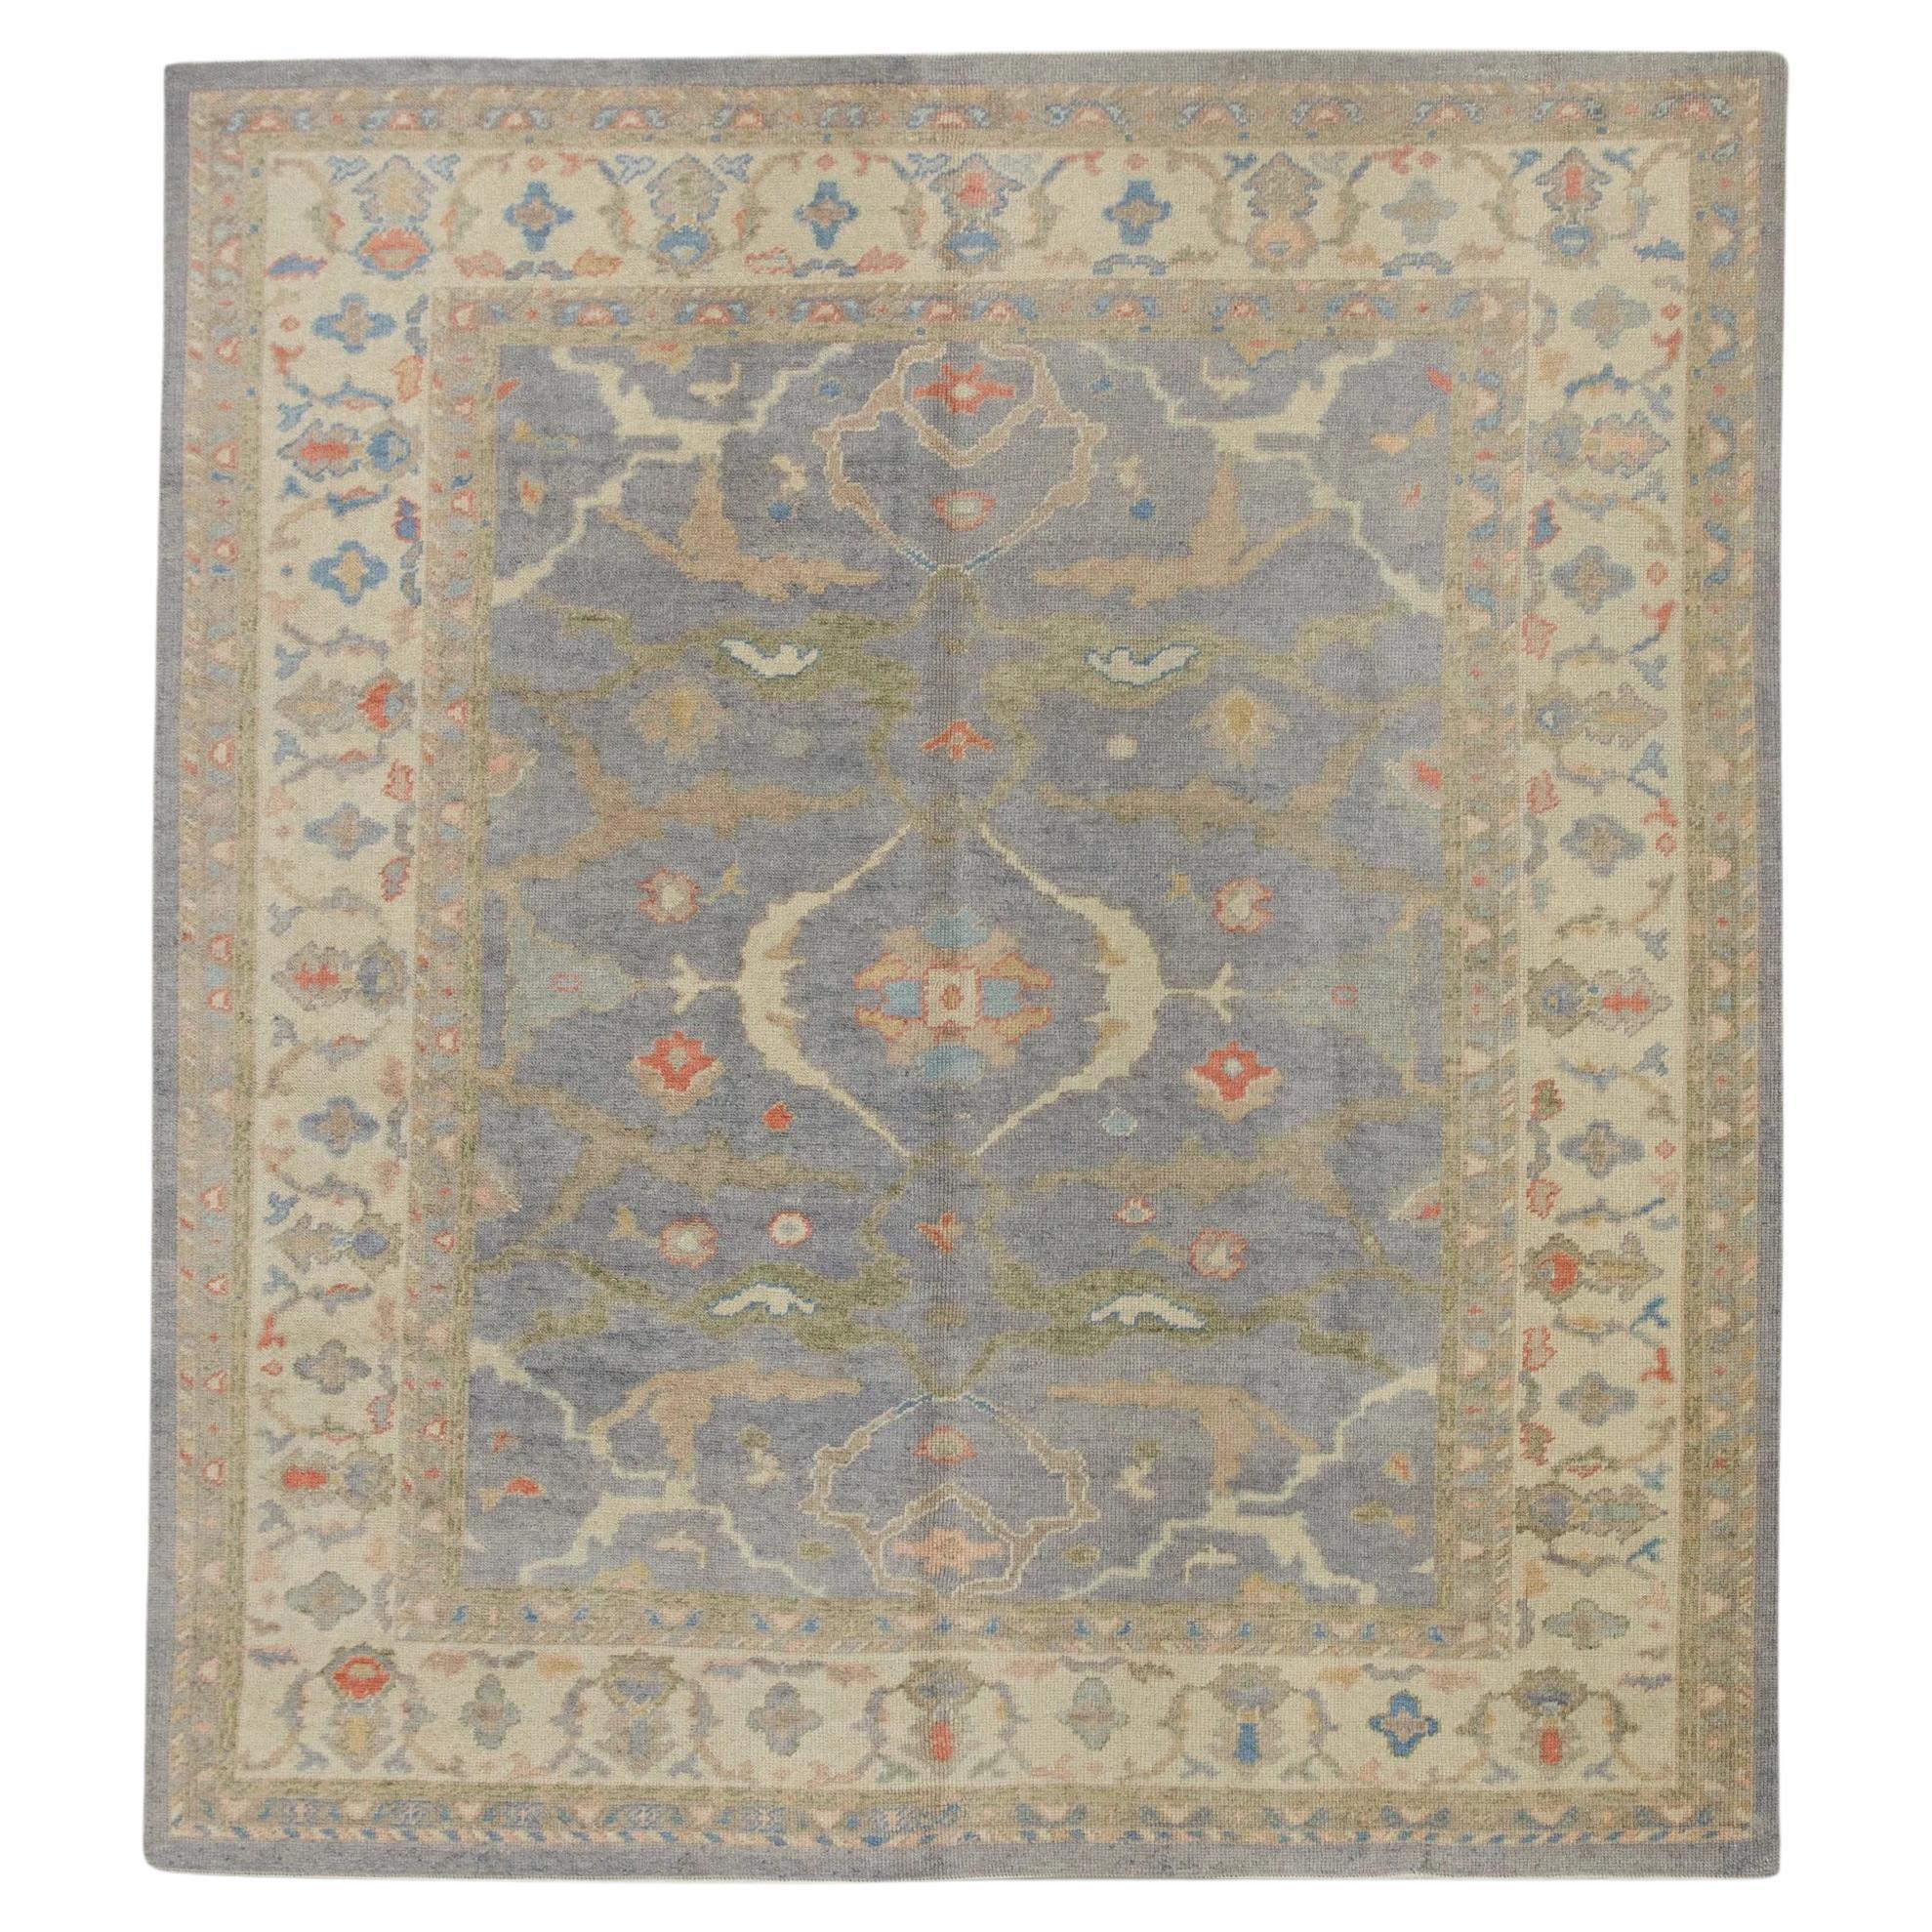 Blue Handwoven Wool Turkish Oushak Rug in Multicolor Floral Pattern 8' x 8'11"